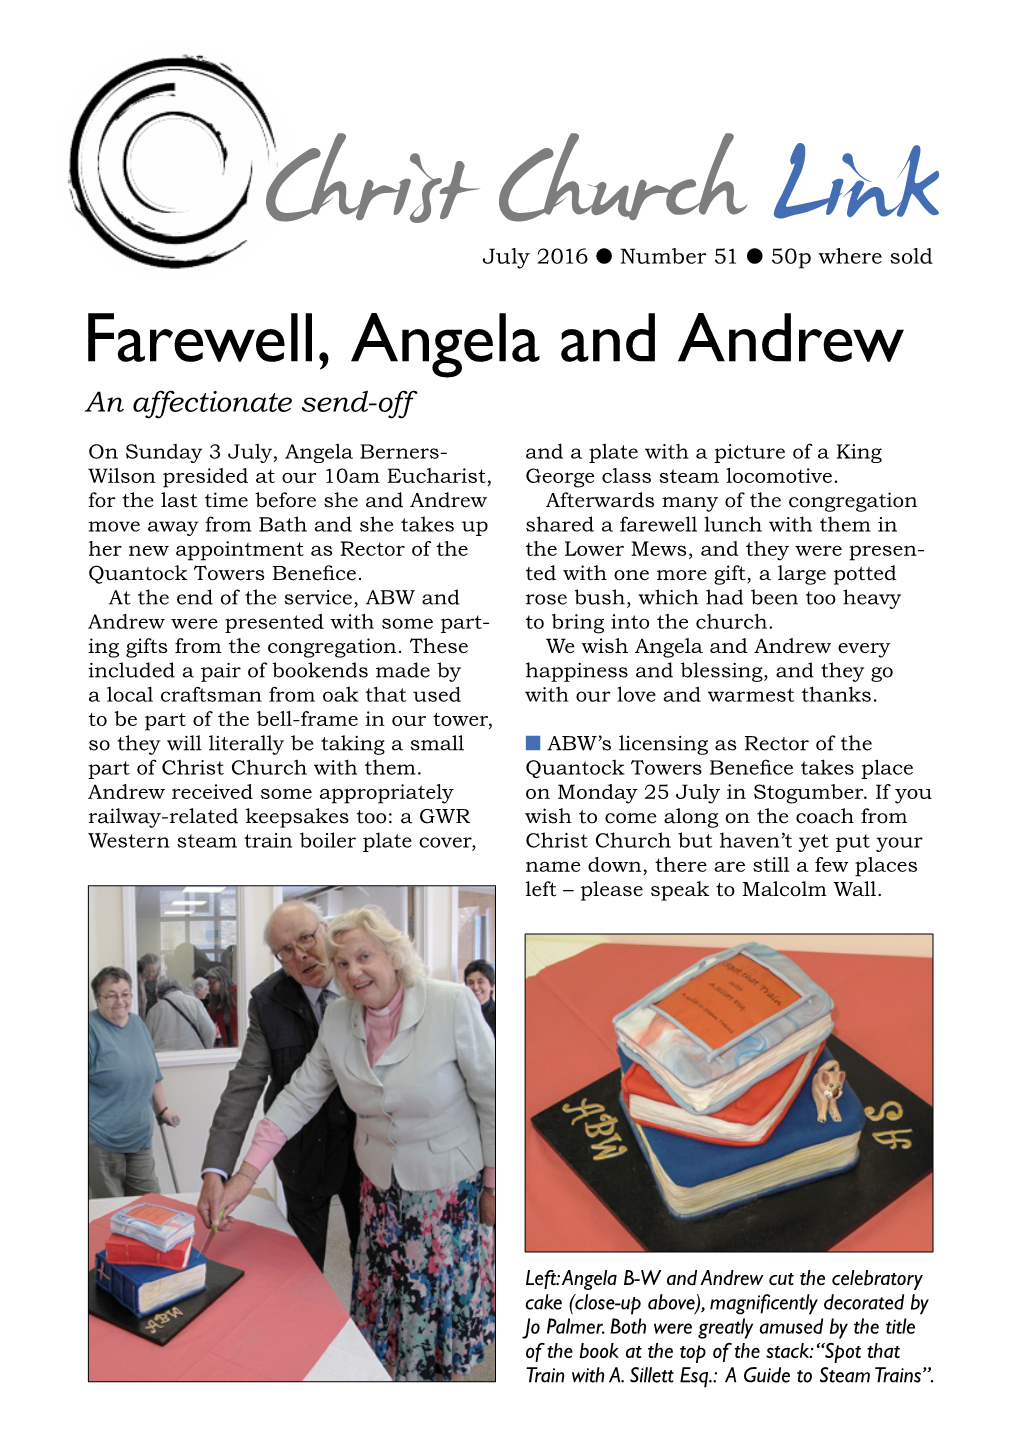 Farewell, Angela and Andrew an Affectionate Send-Off